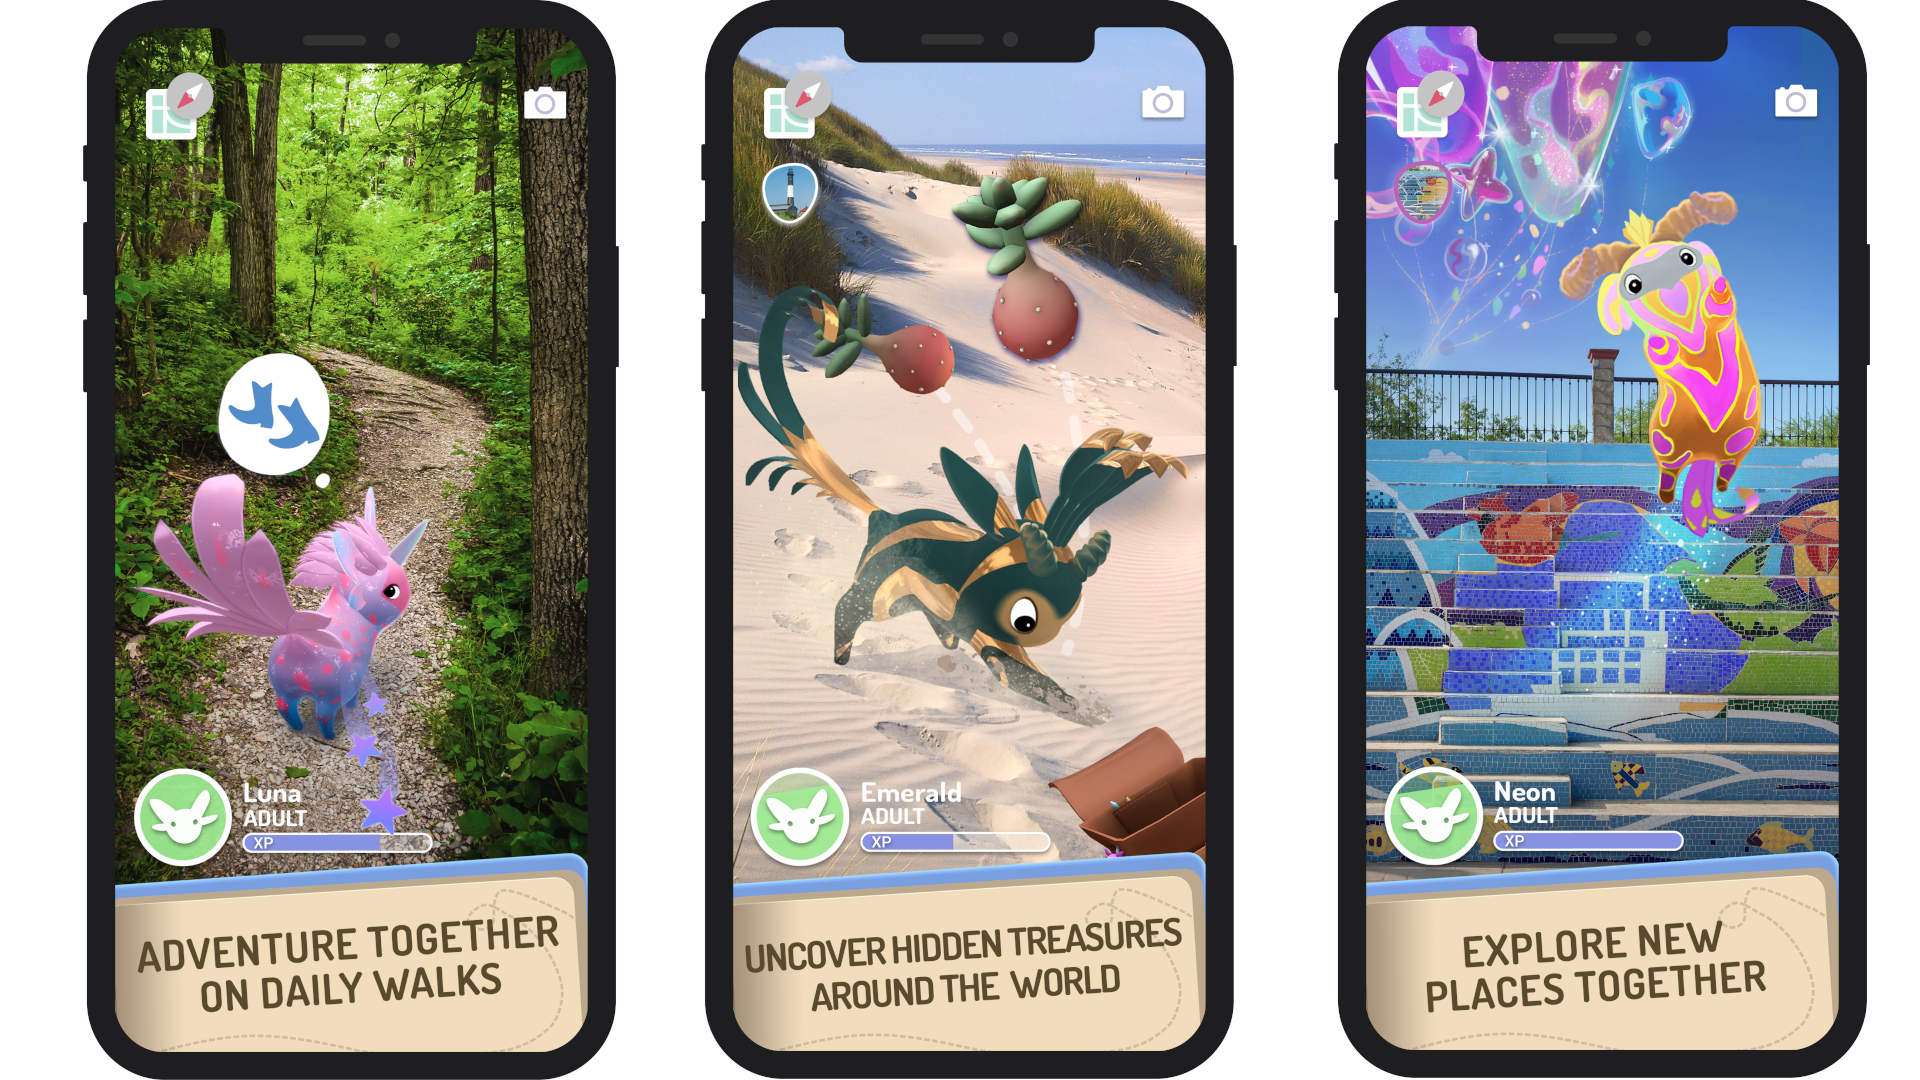 Mobile screenshots showing player activities with Peridots, including daily walks, finding treasure, and exploring new places